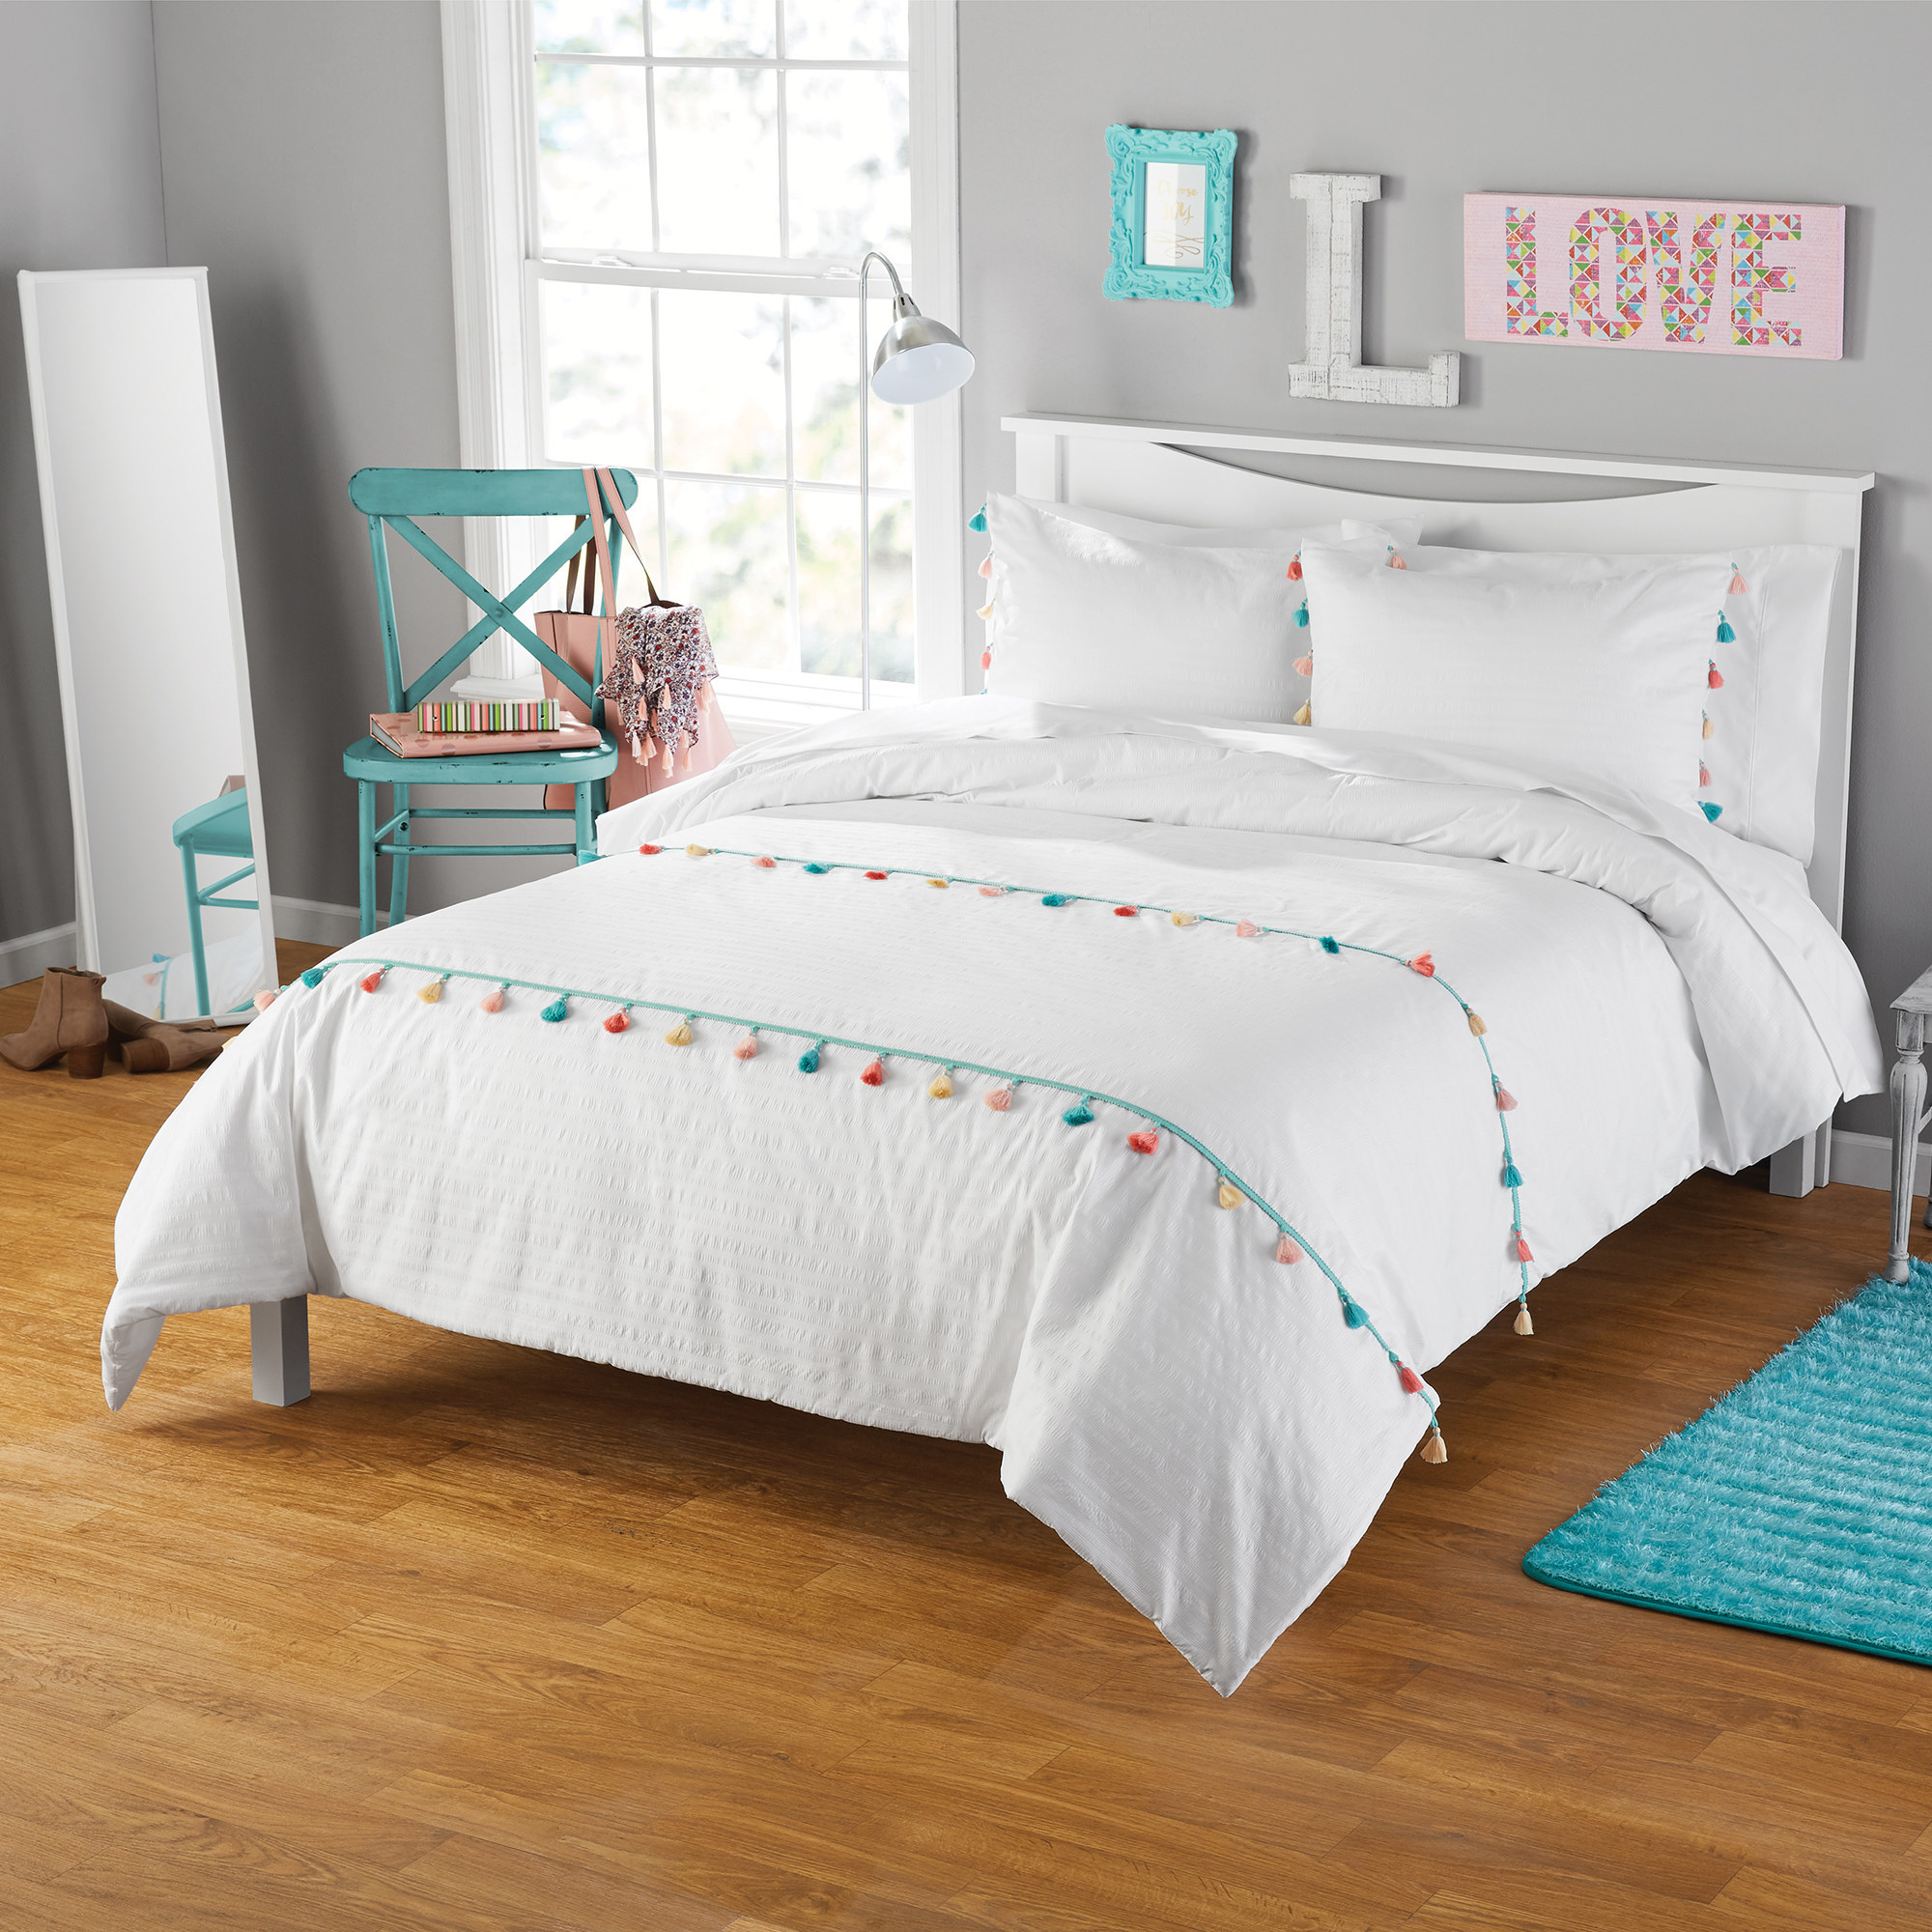 The white set with multicolor accents on a bed